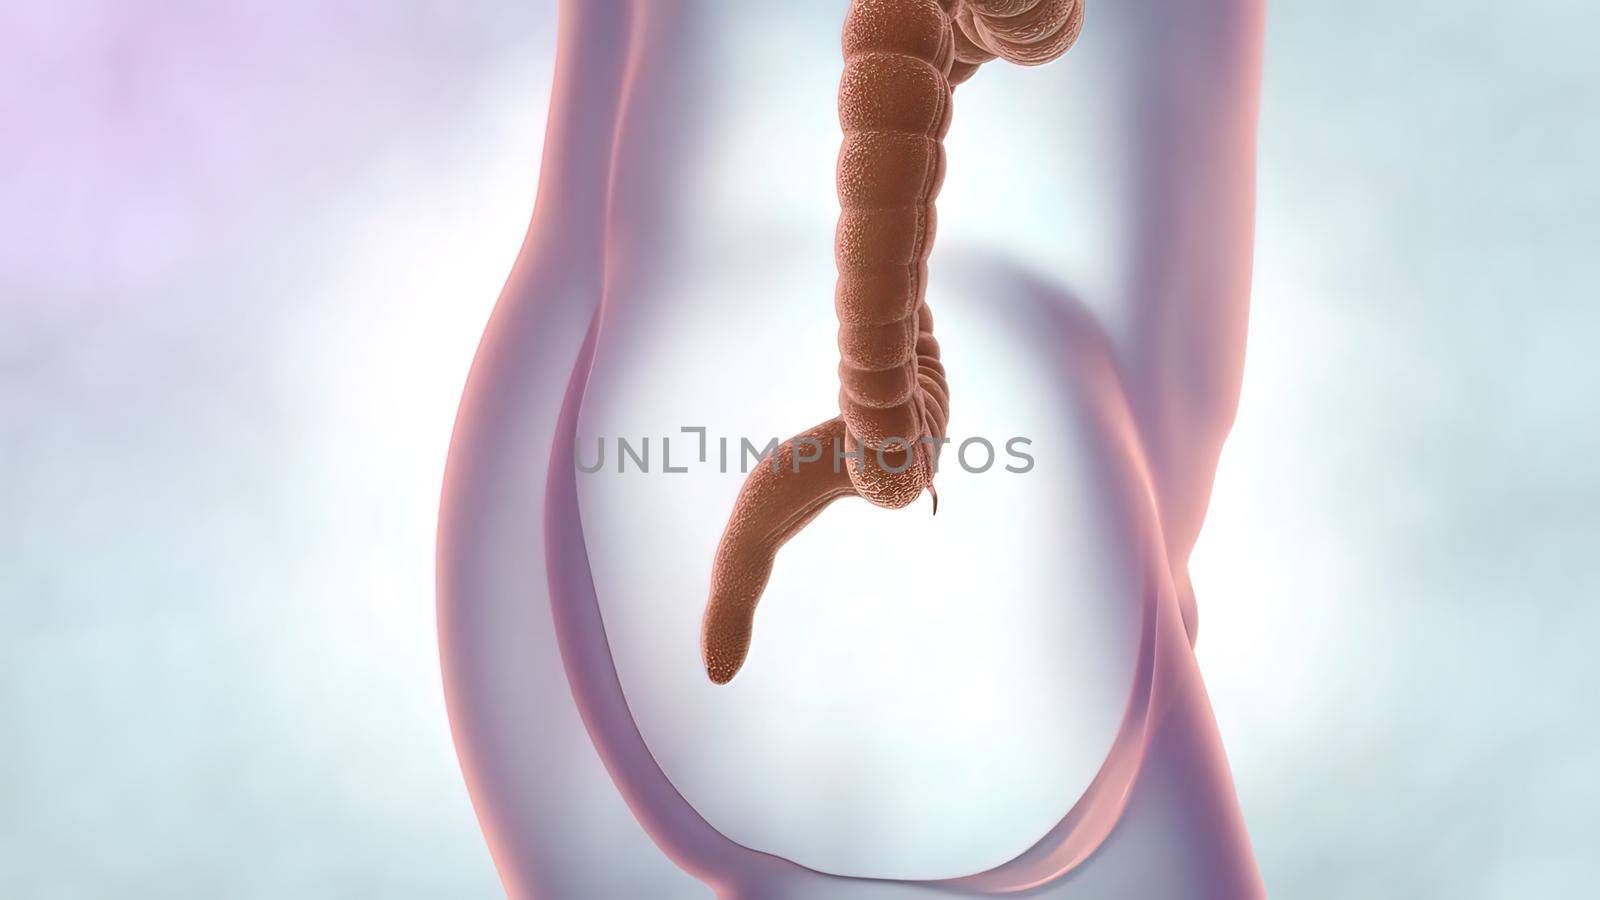 The large intestine is the final part of the gastrointestinal tract and digestive system in vertebrates. 3D illustration